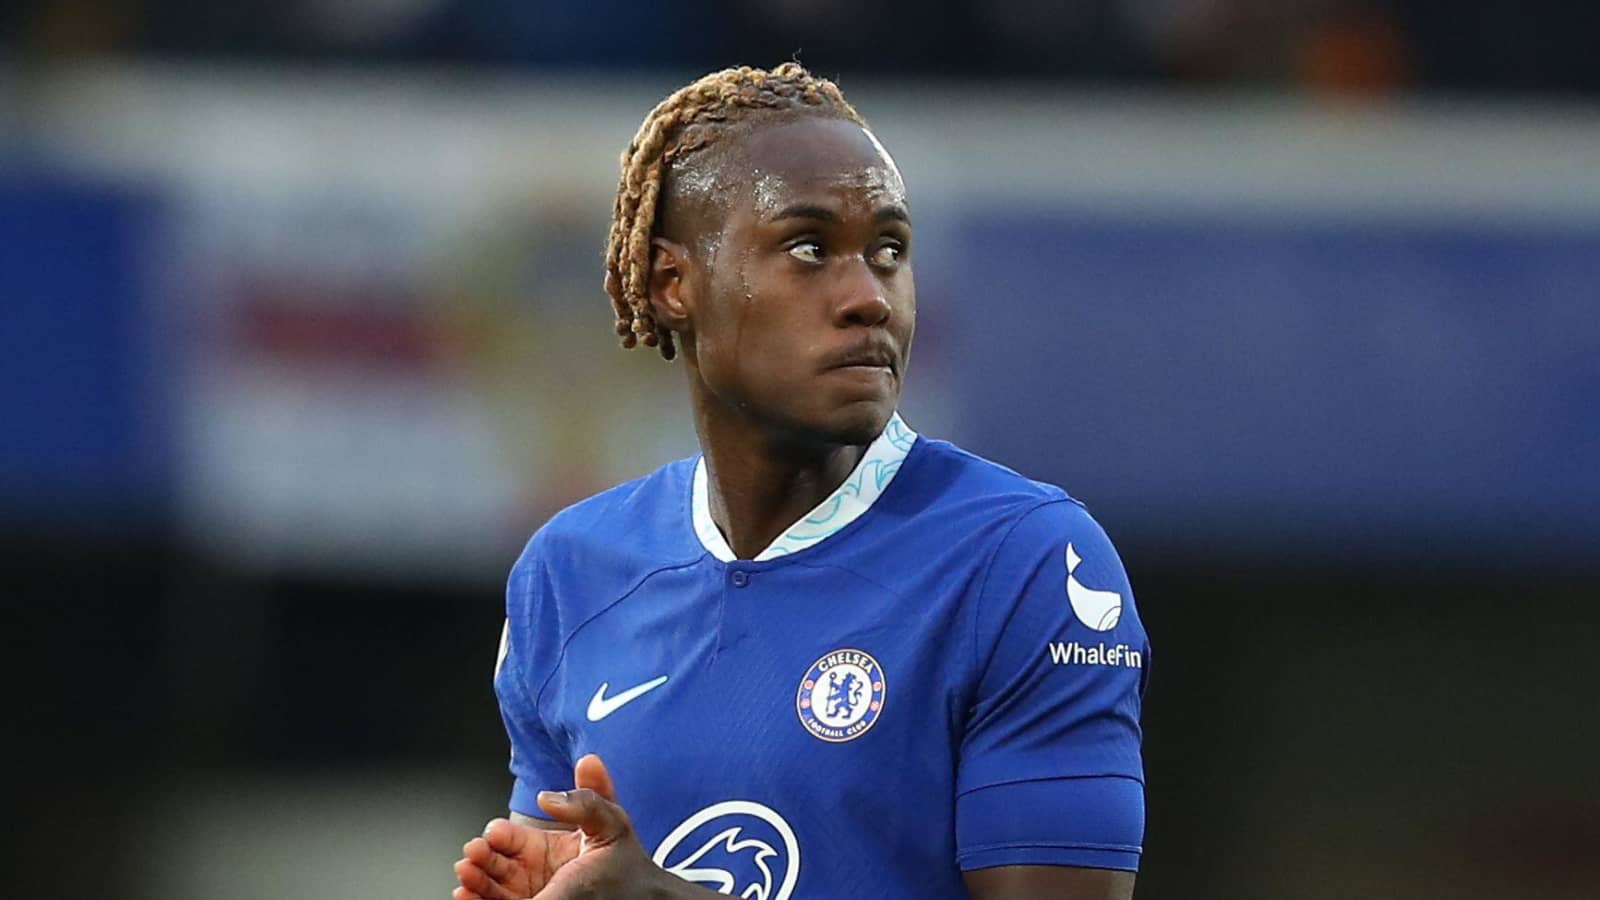 Bayern Munich fail to sign Chelsea centre-back Trevoh Chalobah on deadline day